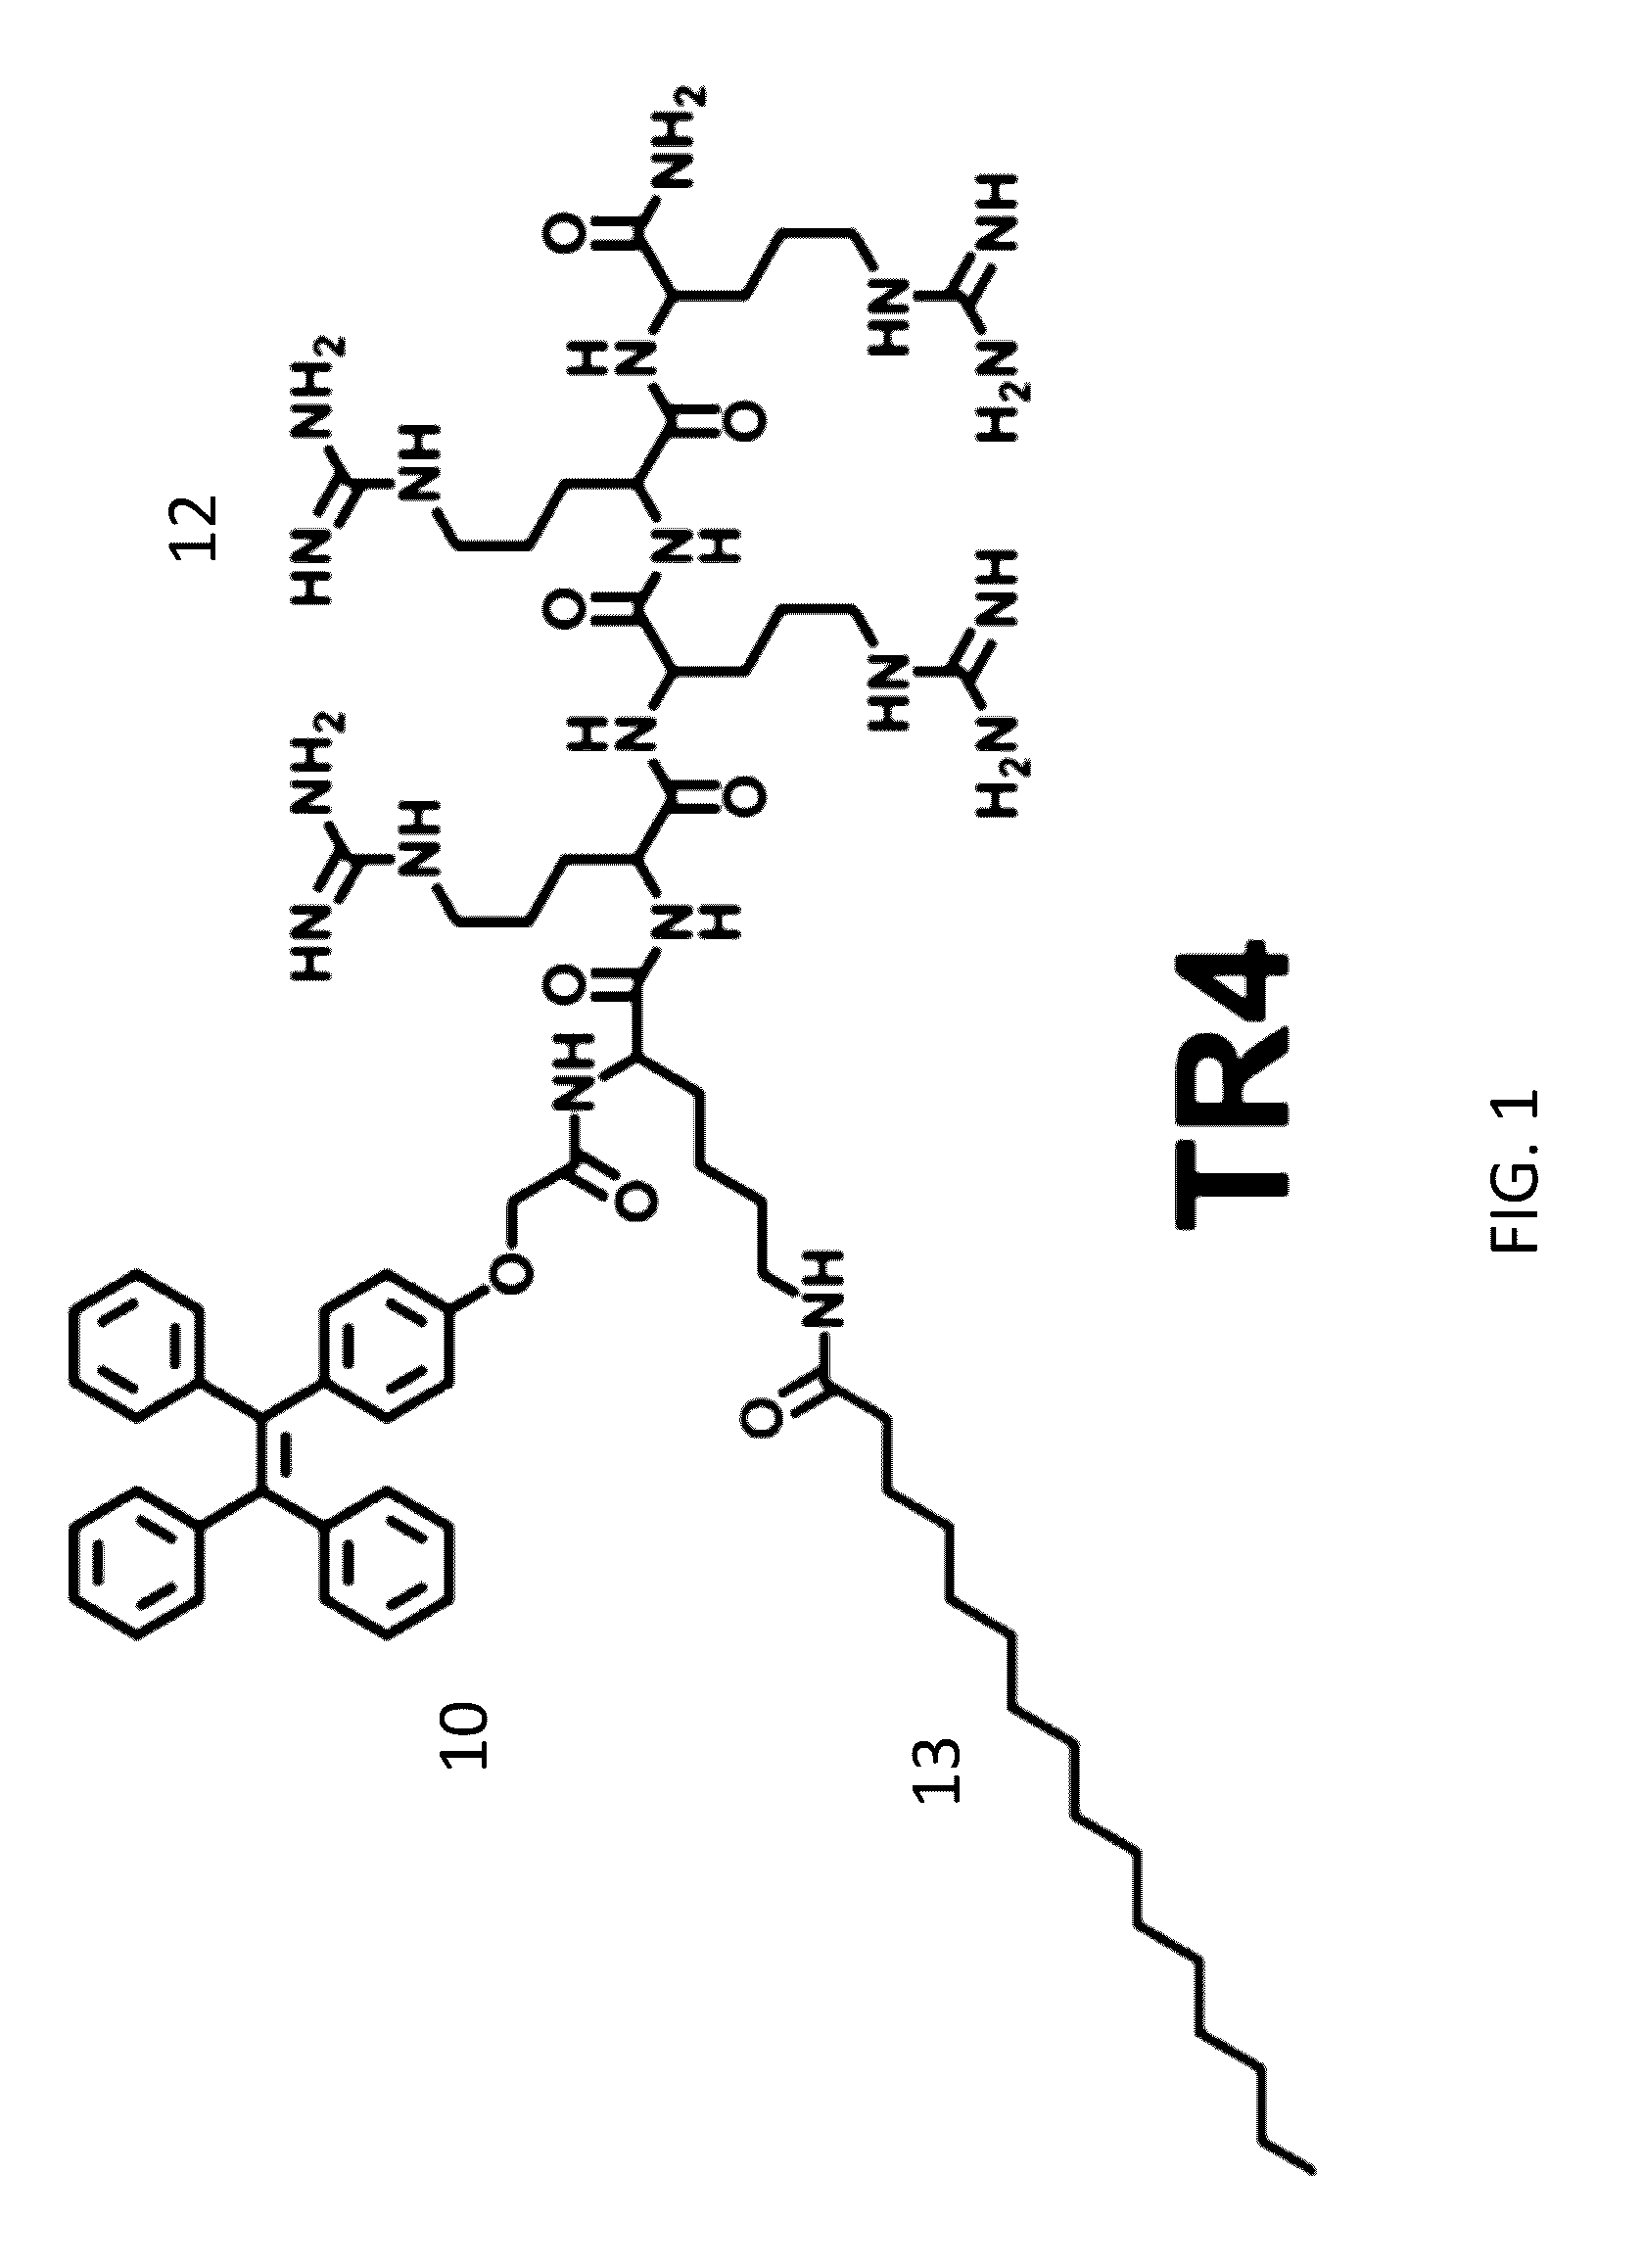 Aggregation-Induced Emission Luminogen Having An Peptide Sequence And Its Uses Thereof